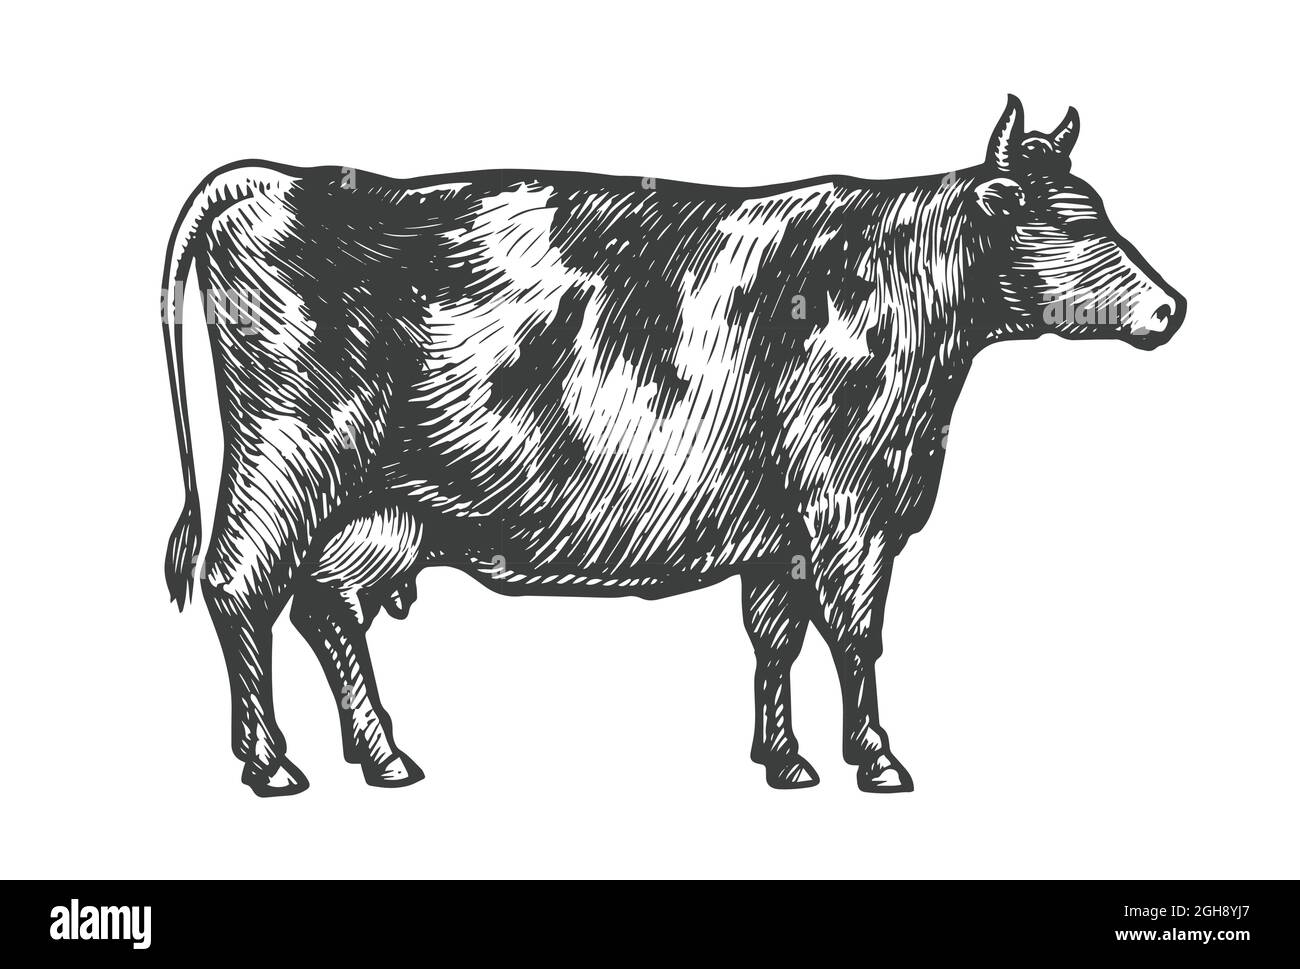 Hand drawn sketch of a cow. Cattle, livestock, animal grazing vector illustration Stock Vector